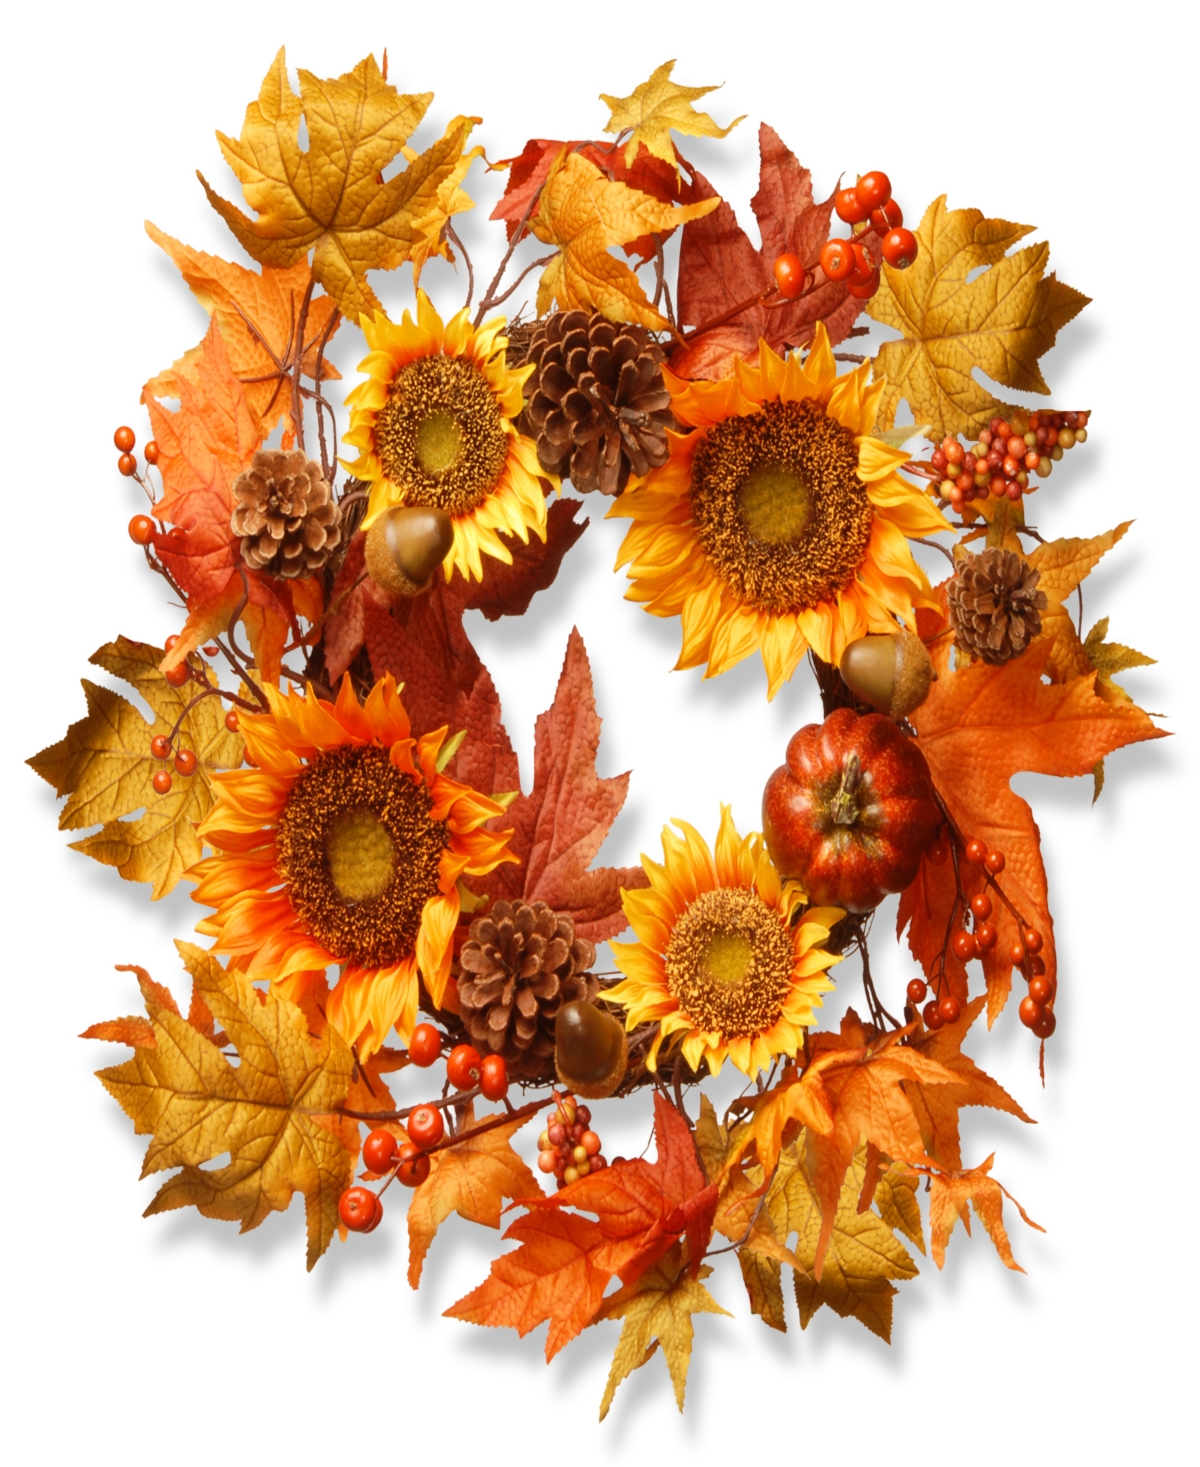 22" Artificial Autumn Wreath, Decorated with Sunflowers, Pinecones, Berry Clusters, Acorns, Pumpkins, Maple Leaves, Autumn Colle